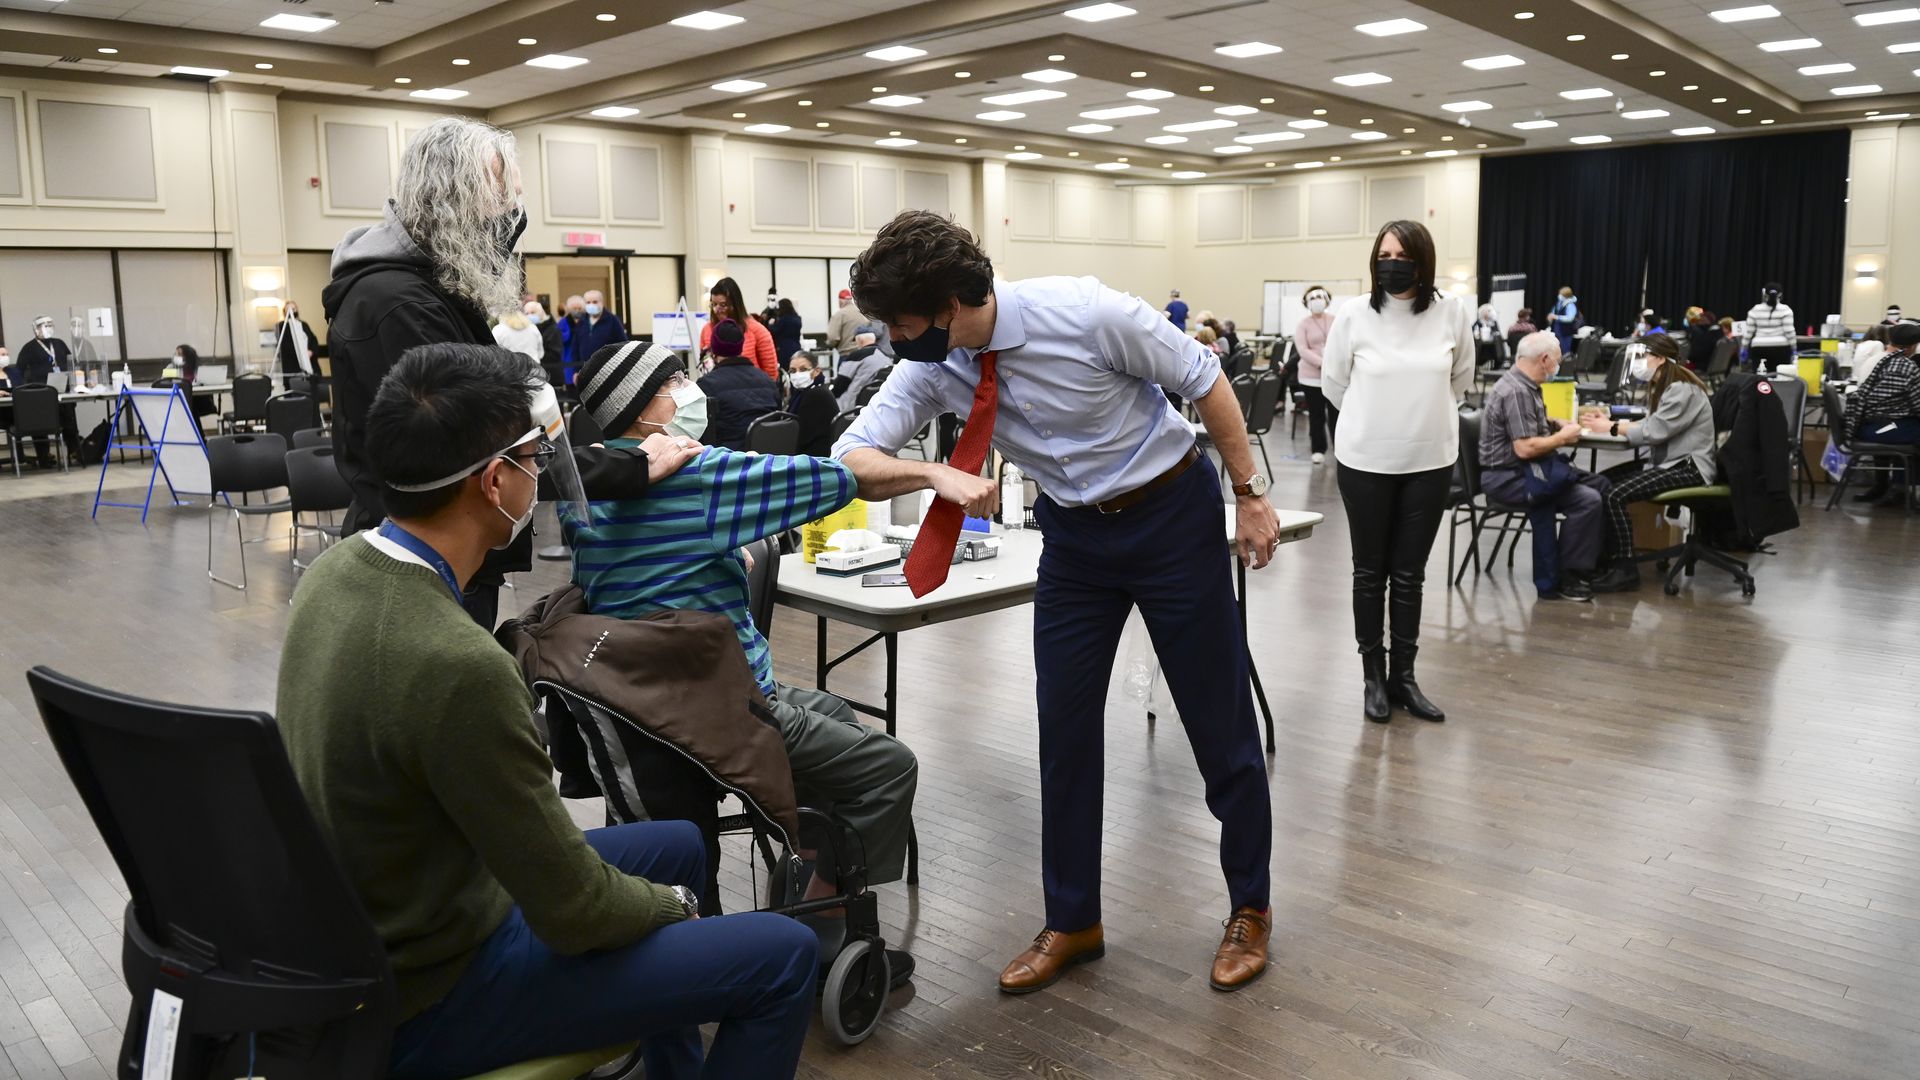 Picture of Canadian Prime Minister Justin Trudeau bumping elbows with an elderly person in a wheel chair